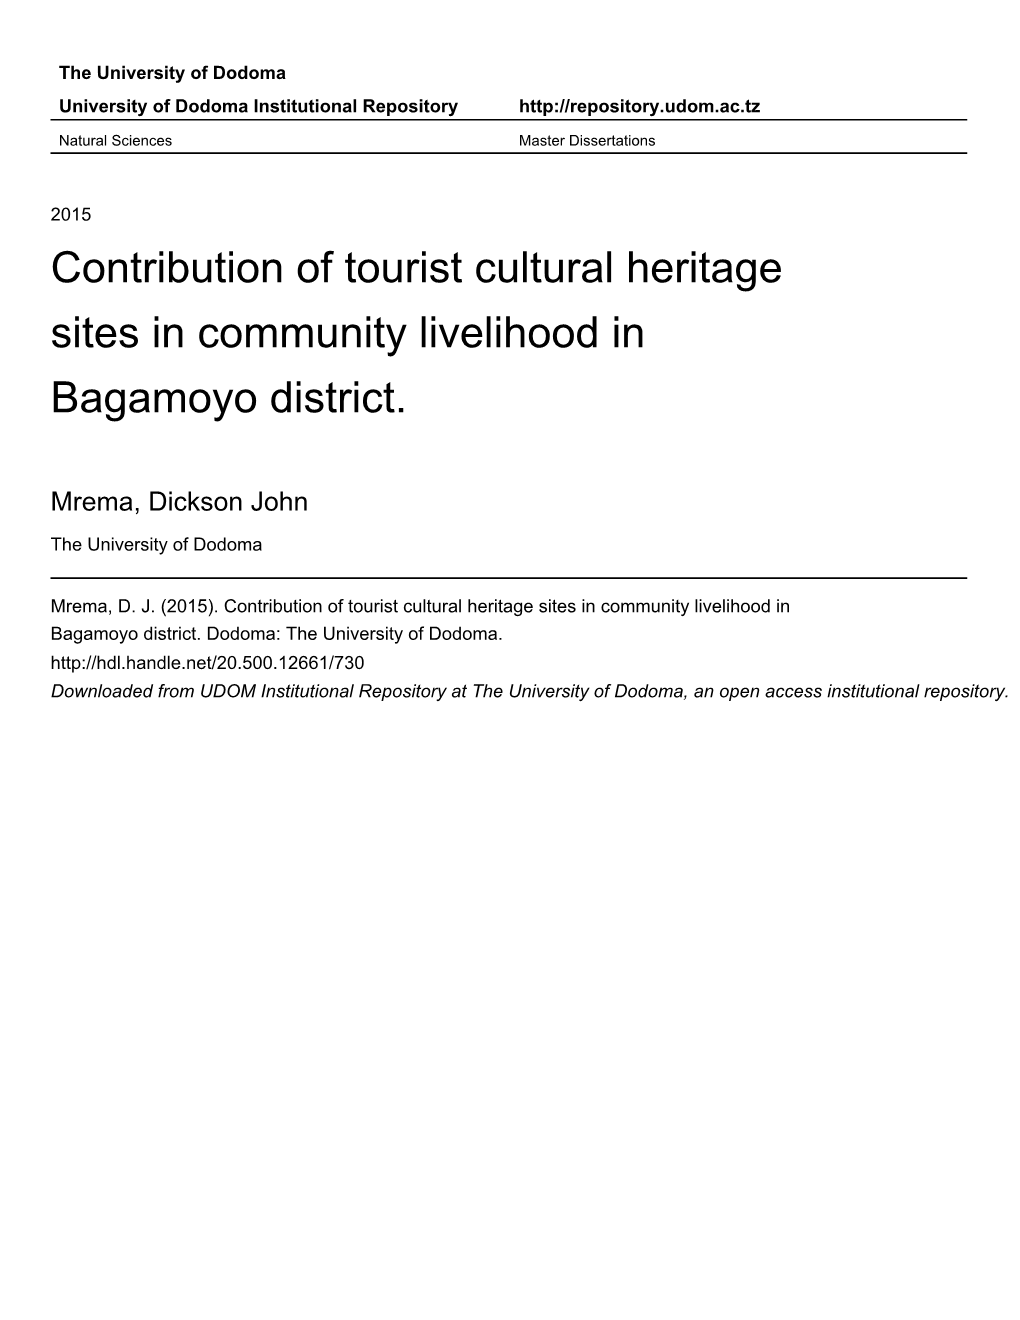 Contribution of Tourist Cultural Heritage Sites in Community Livelihood in Bagamoyo District